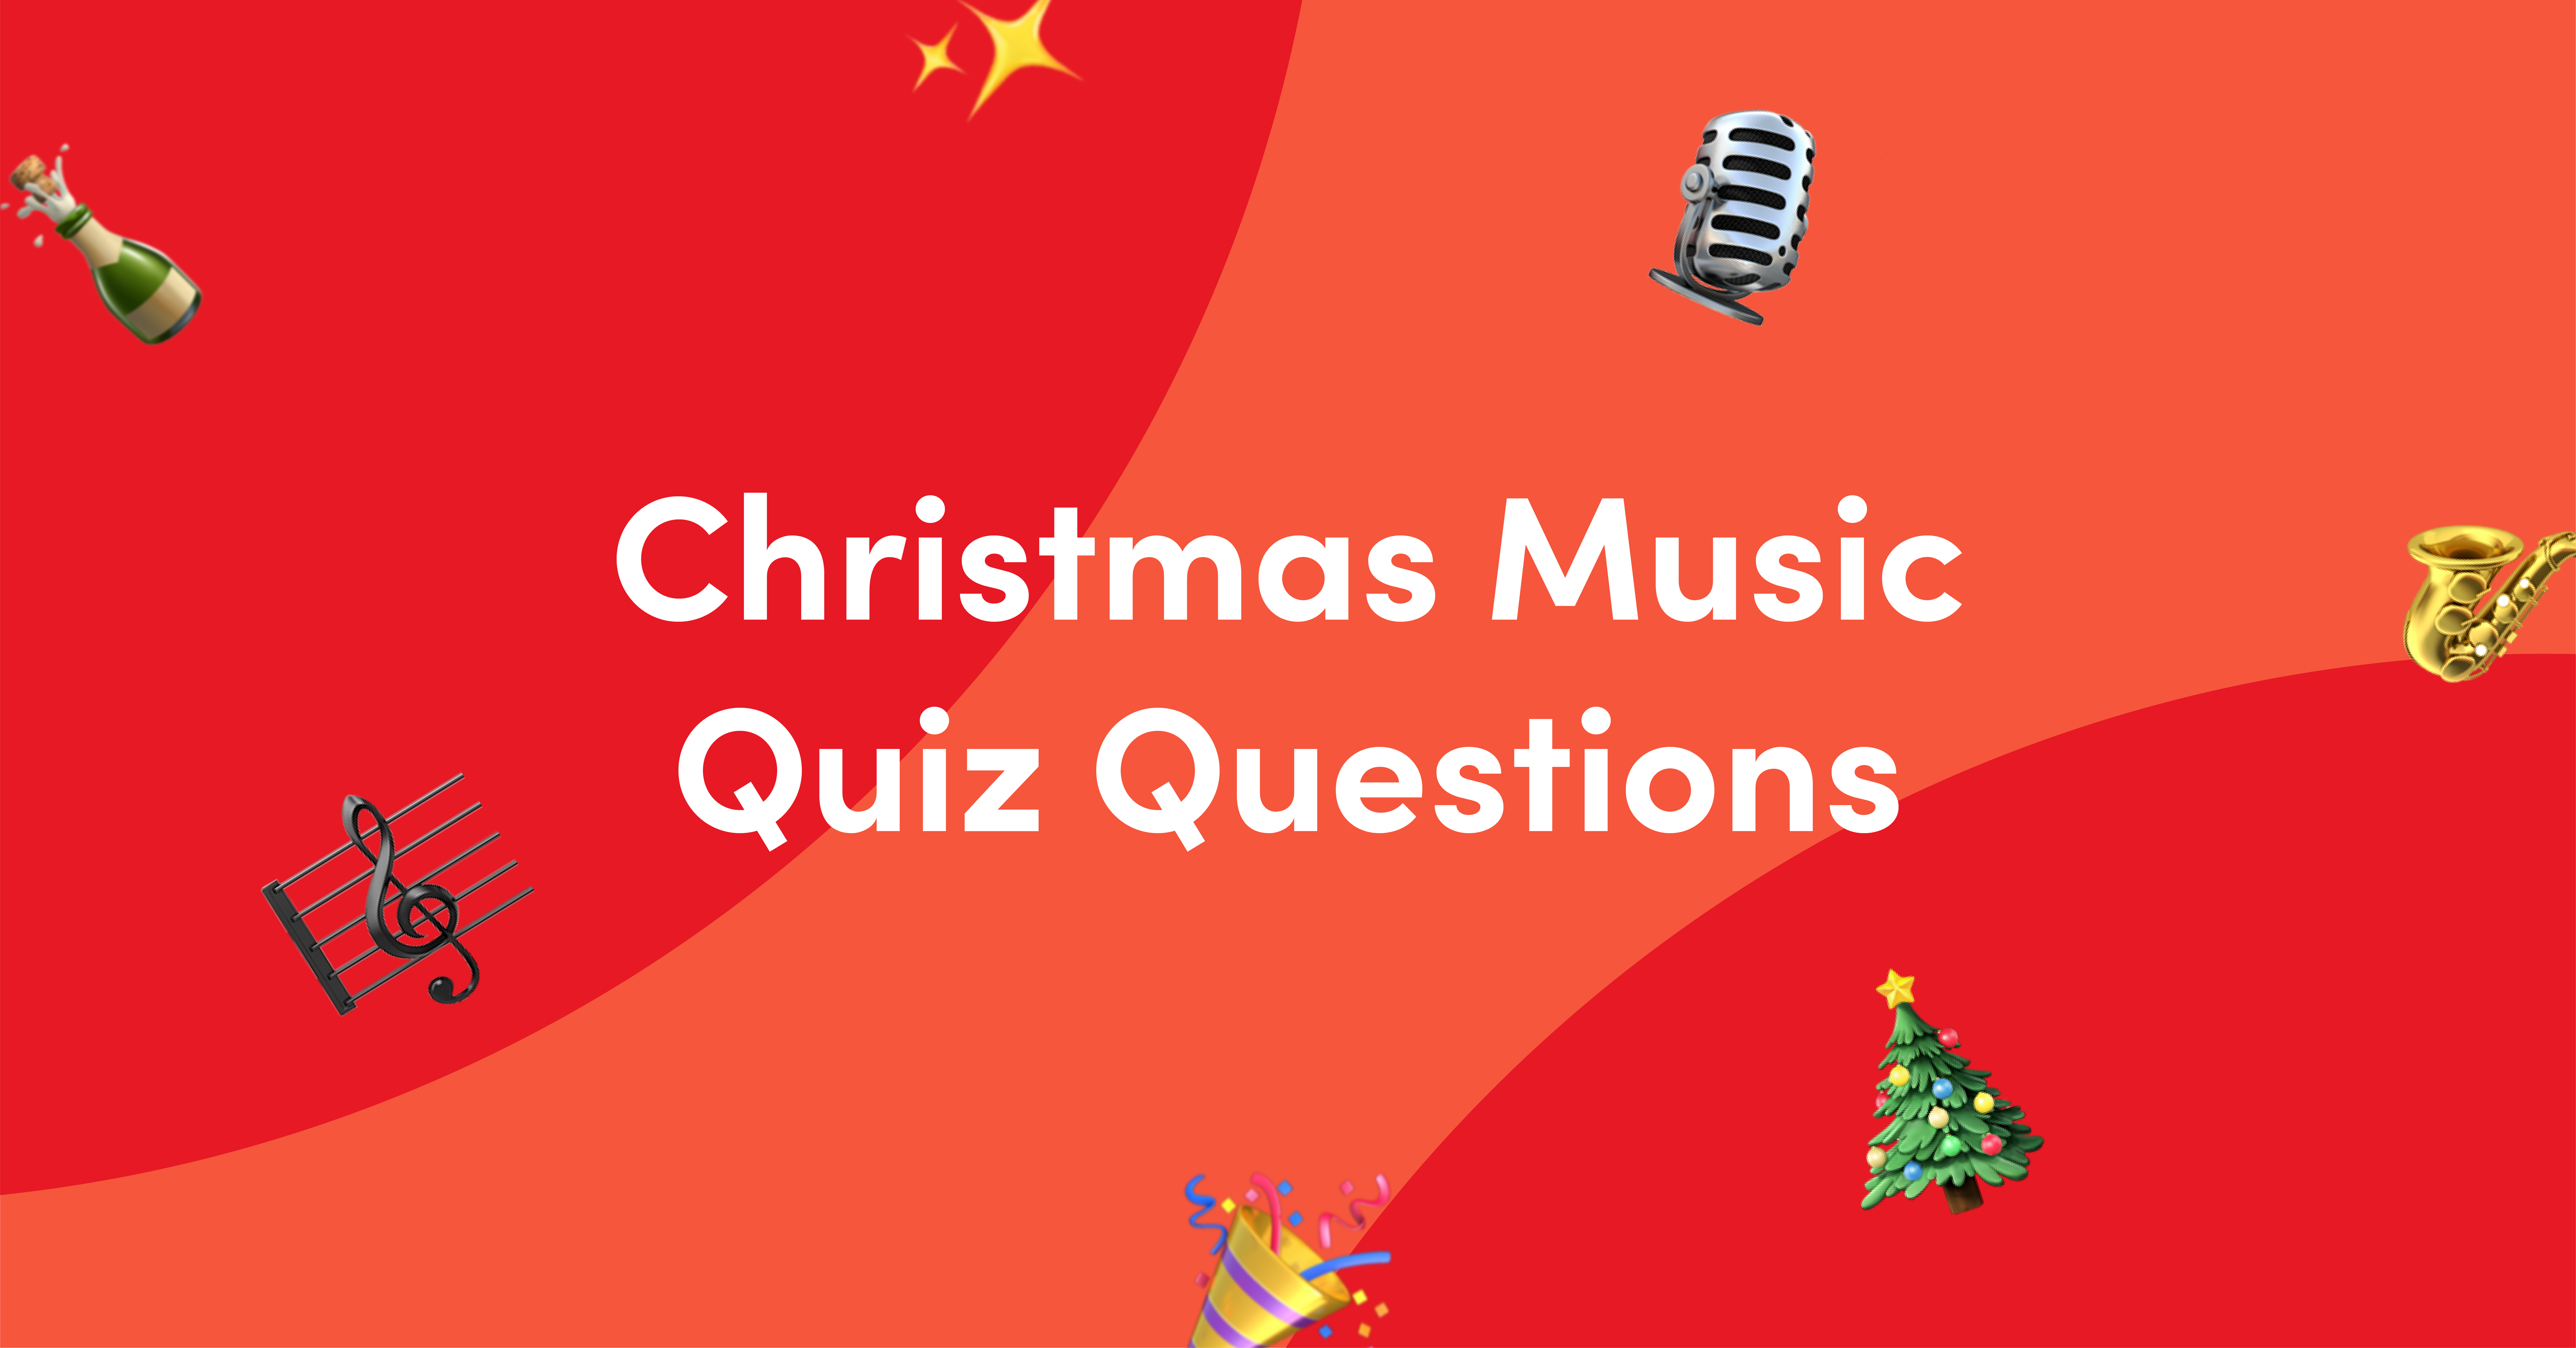 Red background with Christmas-themed emojis for Christmas music quiz questions and answers